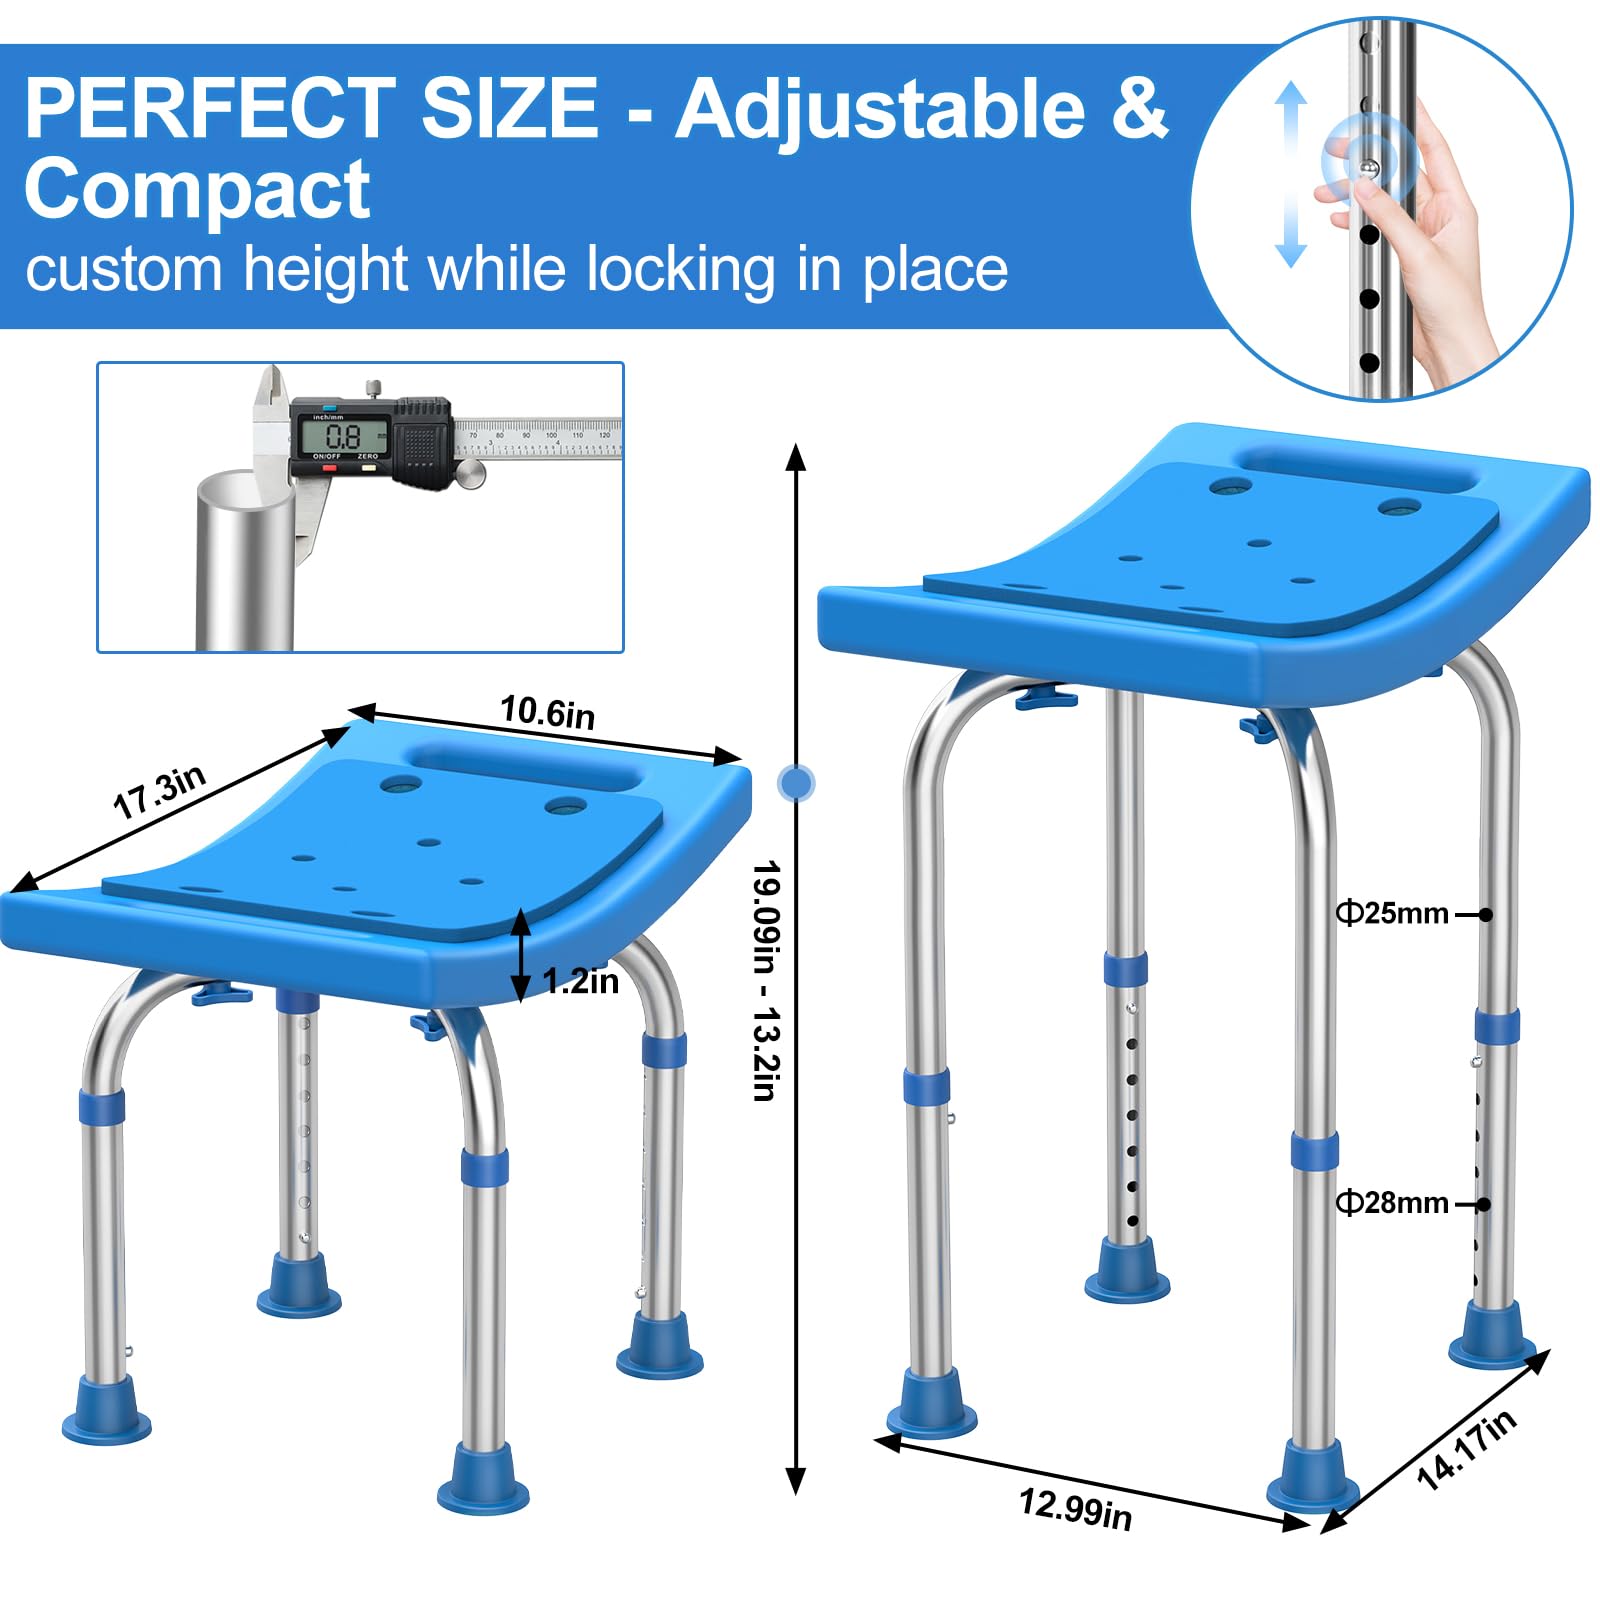 FSA/HSA Eligible Upgraded Heavy Duty Stainless Steel Shower Chair Seat, 400lbs Adjustable Shower Stool w/Assist Grab Bar/Padded,Blue Bath Seat Chair,Tool-Free Shower Seat for Inside Bathtub by UGarden